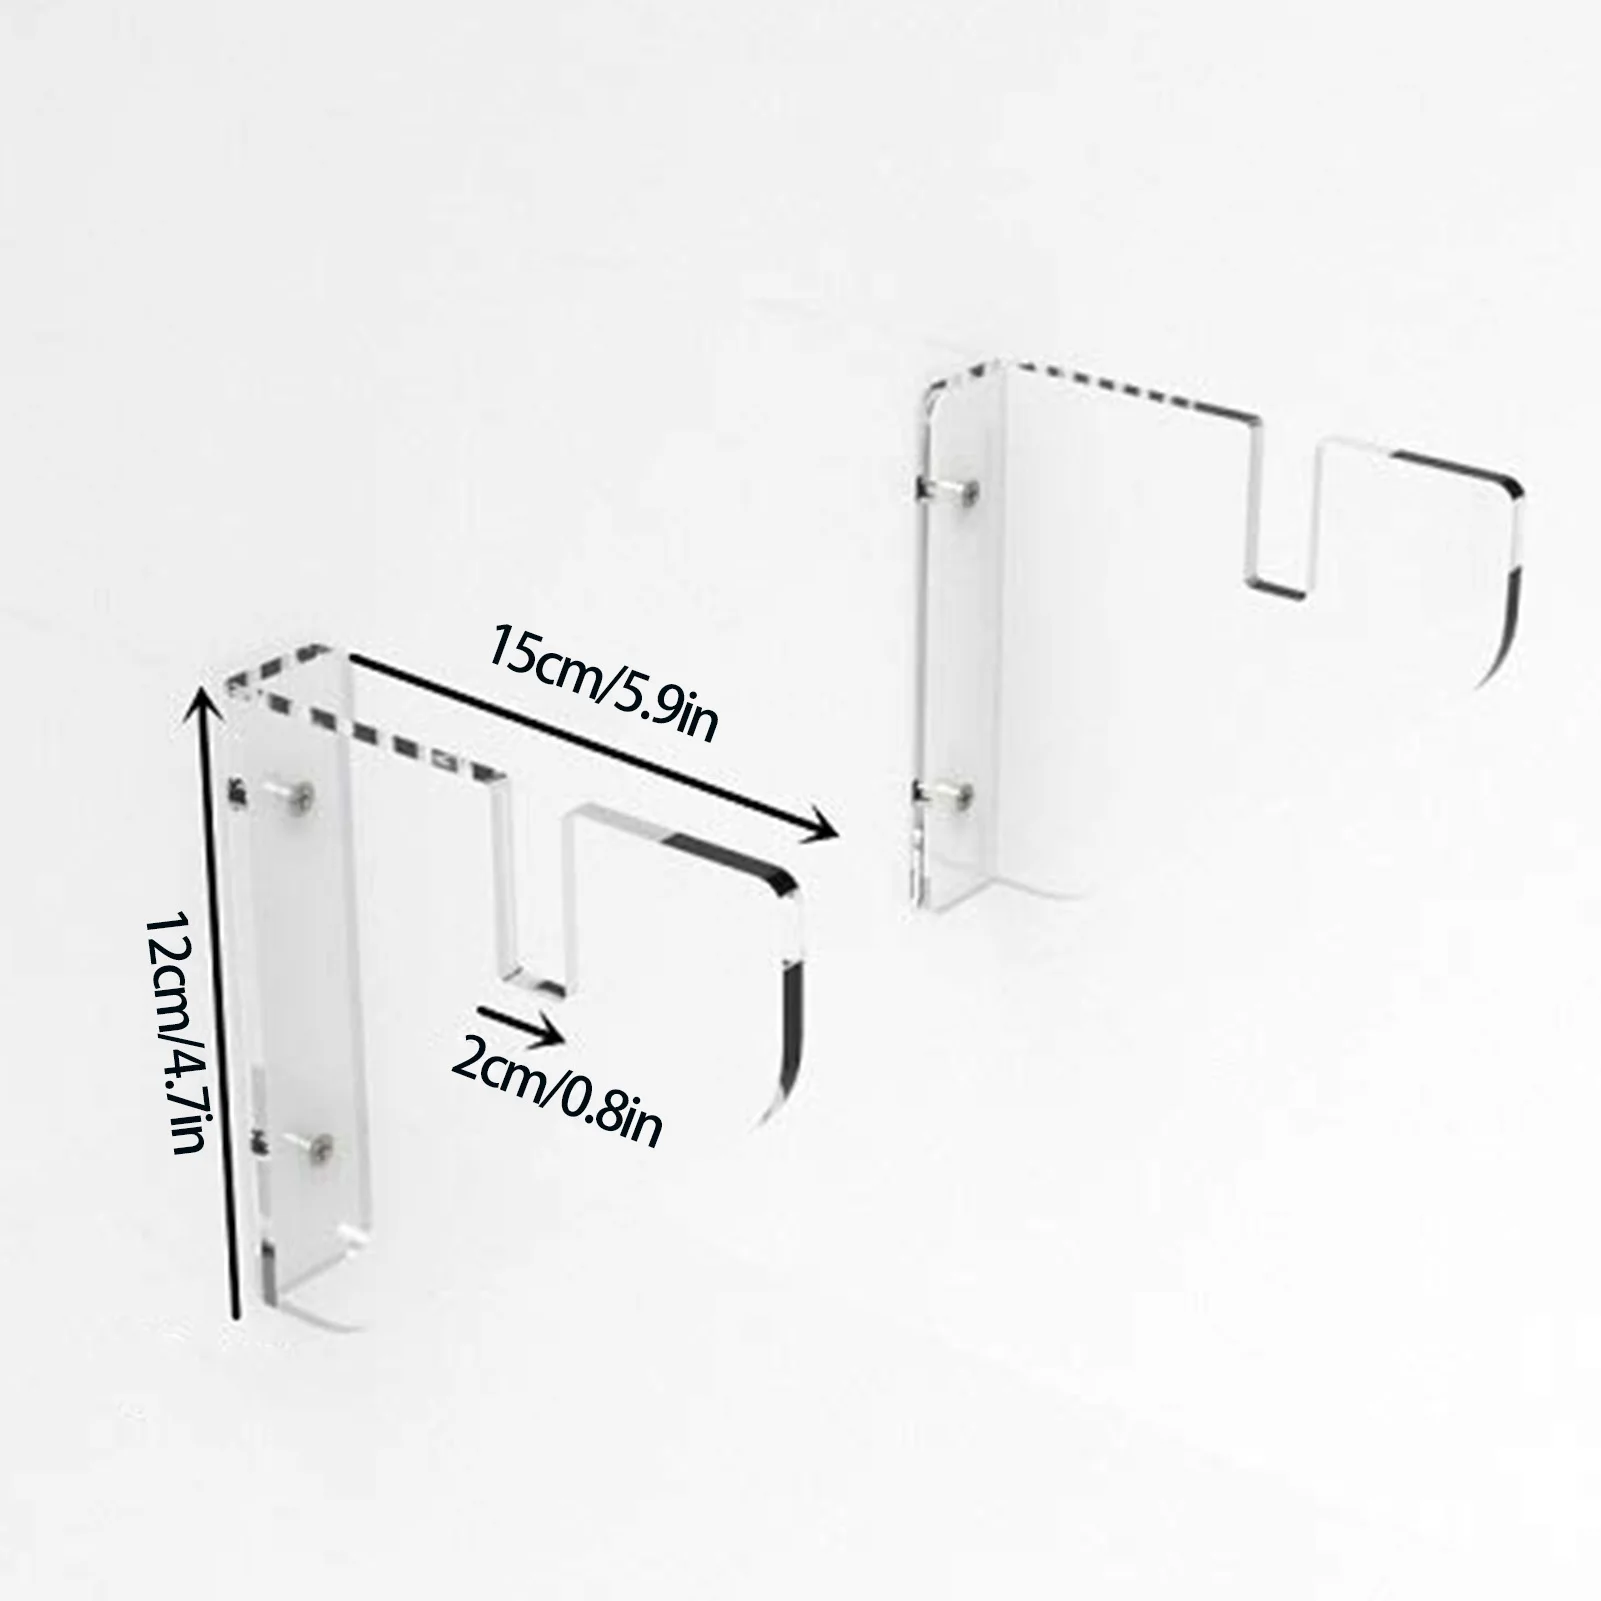 2pcs Clear Acrylic Transparent Skateboard Mounts Deck Wall Hanging Brackets Display Stand Rack for Storing Skateboards Longboard